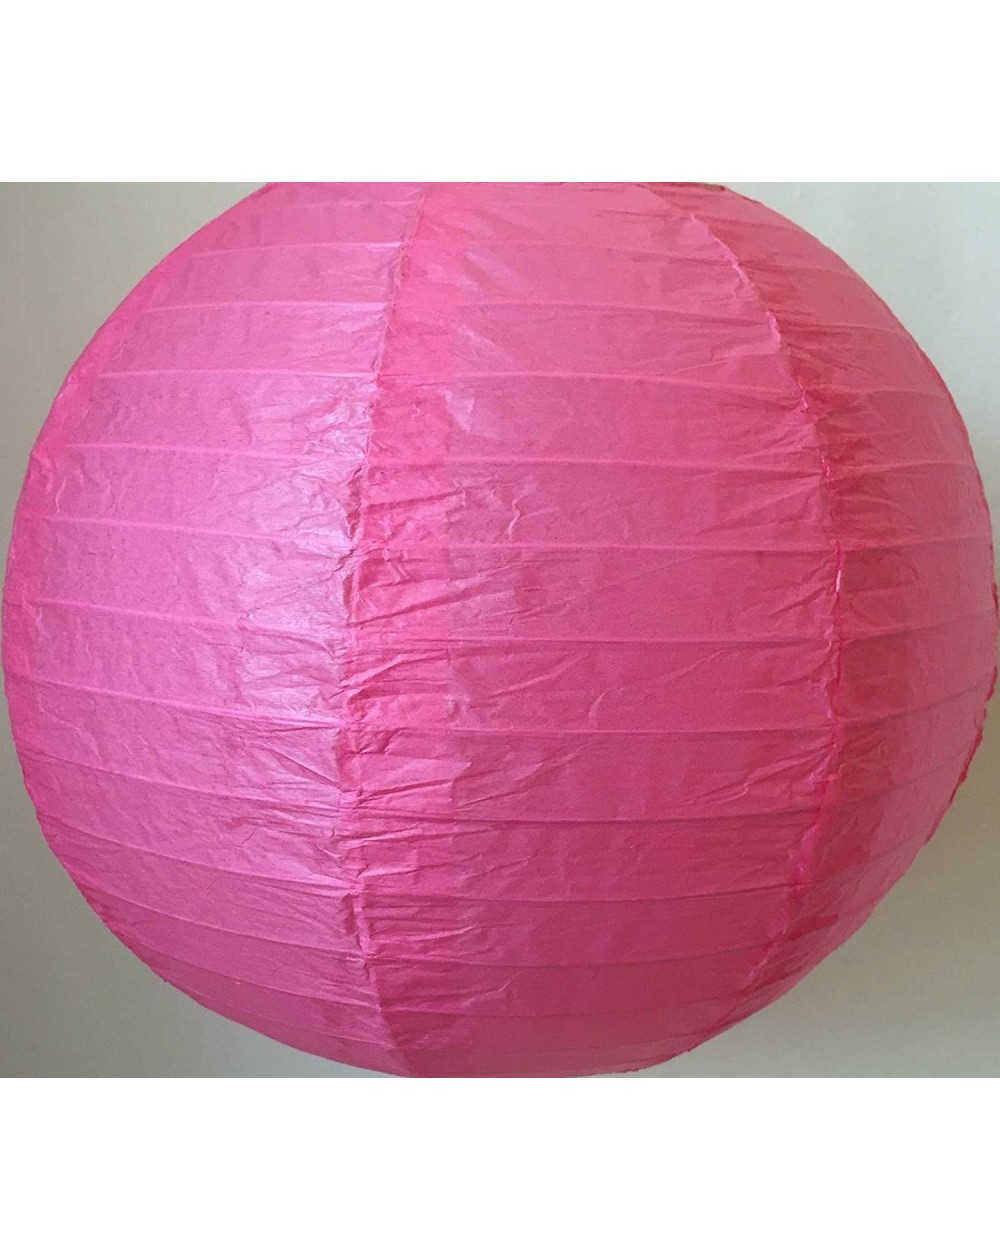 Banners & Garlands Round Paper Lanterns Lamp Wedding Birthday Party Decoration Available Sizes 4" to 18" (Hot Pink- 4"/10CM) ...